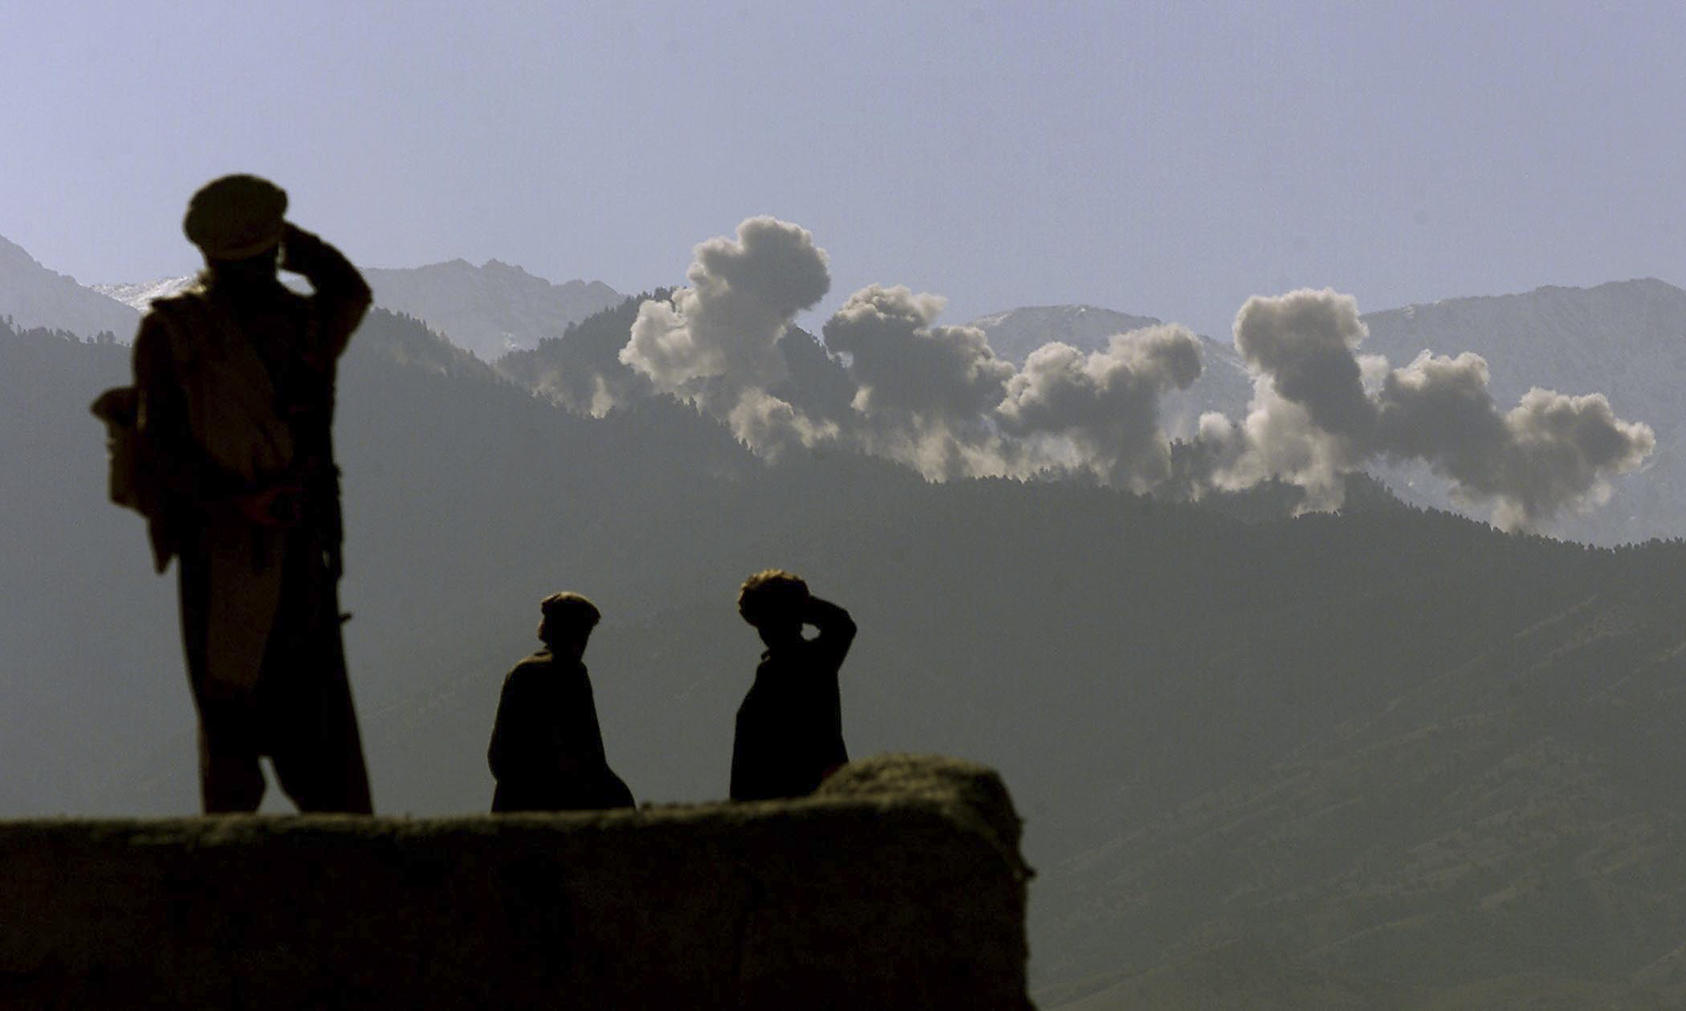 Eastern Shura fighters watch as U.S. B-52’s carpet bomb an area of the Tora Bora mountains in Afghanistan